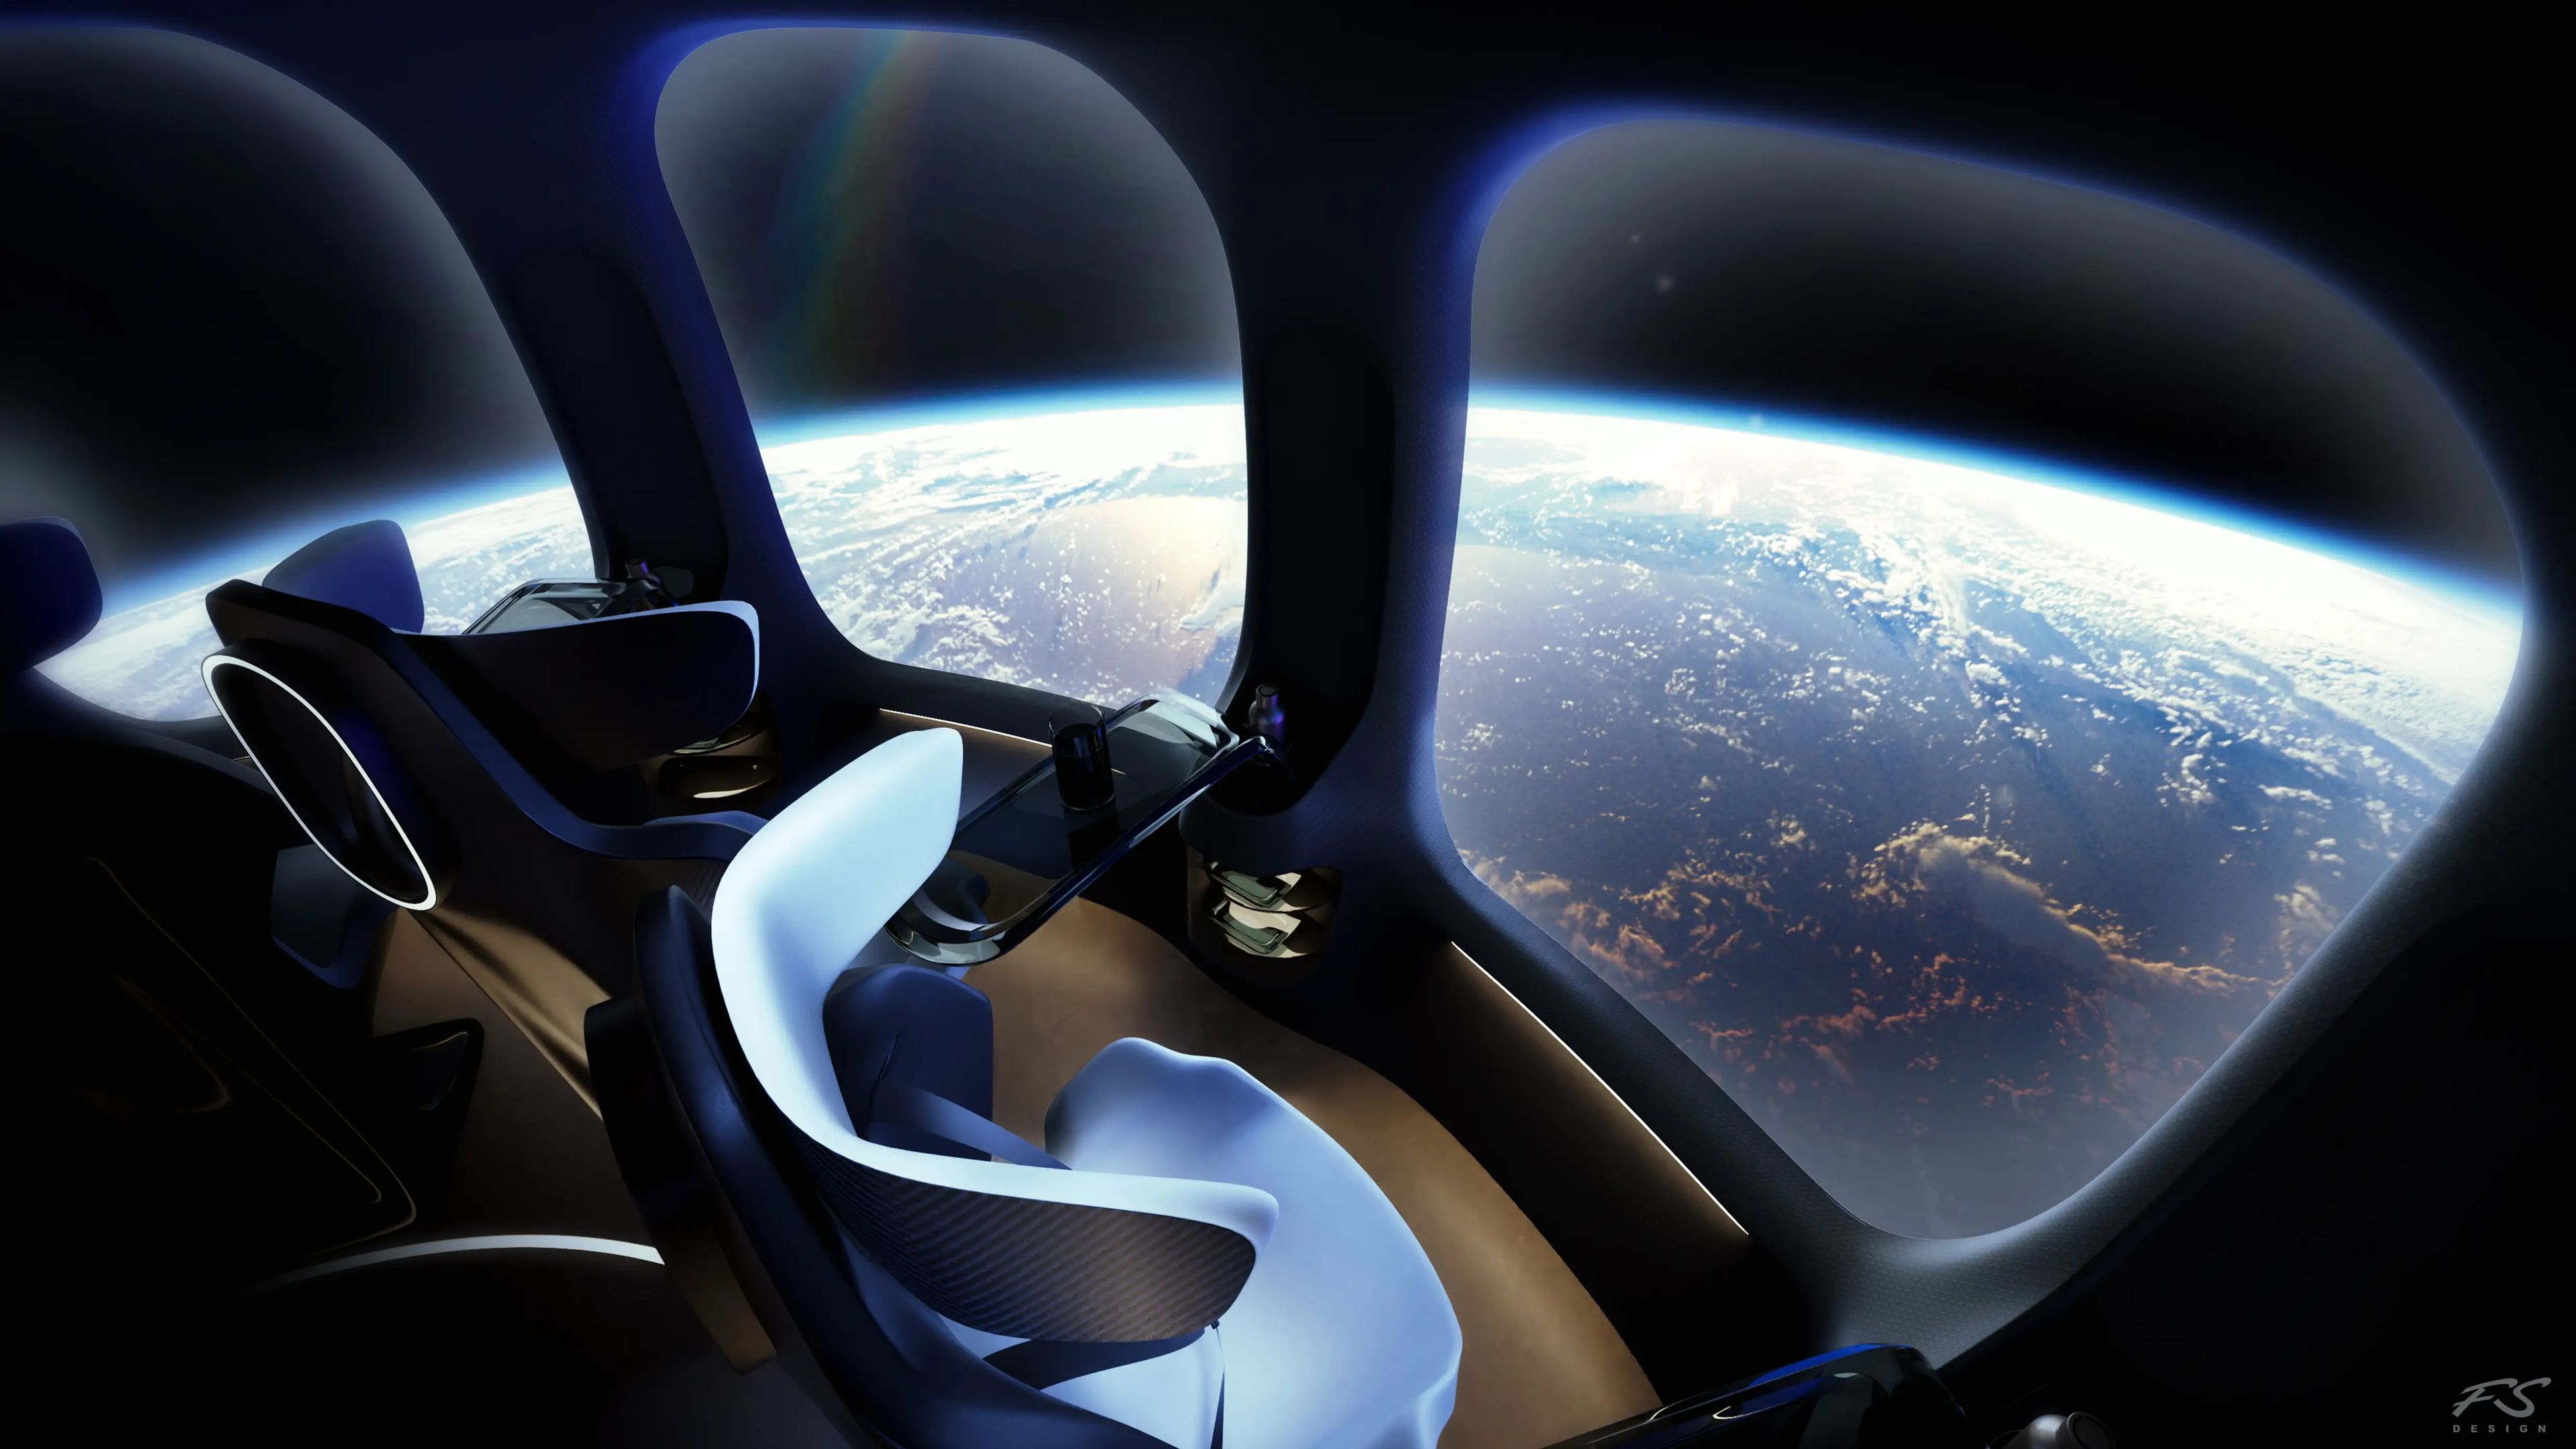 A generated image shows the view of the earth from the inside of a Halo Space capsule